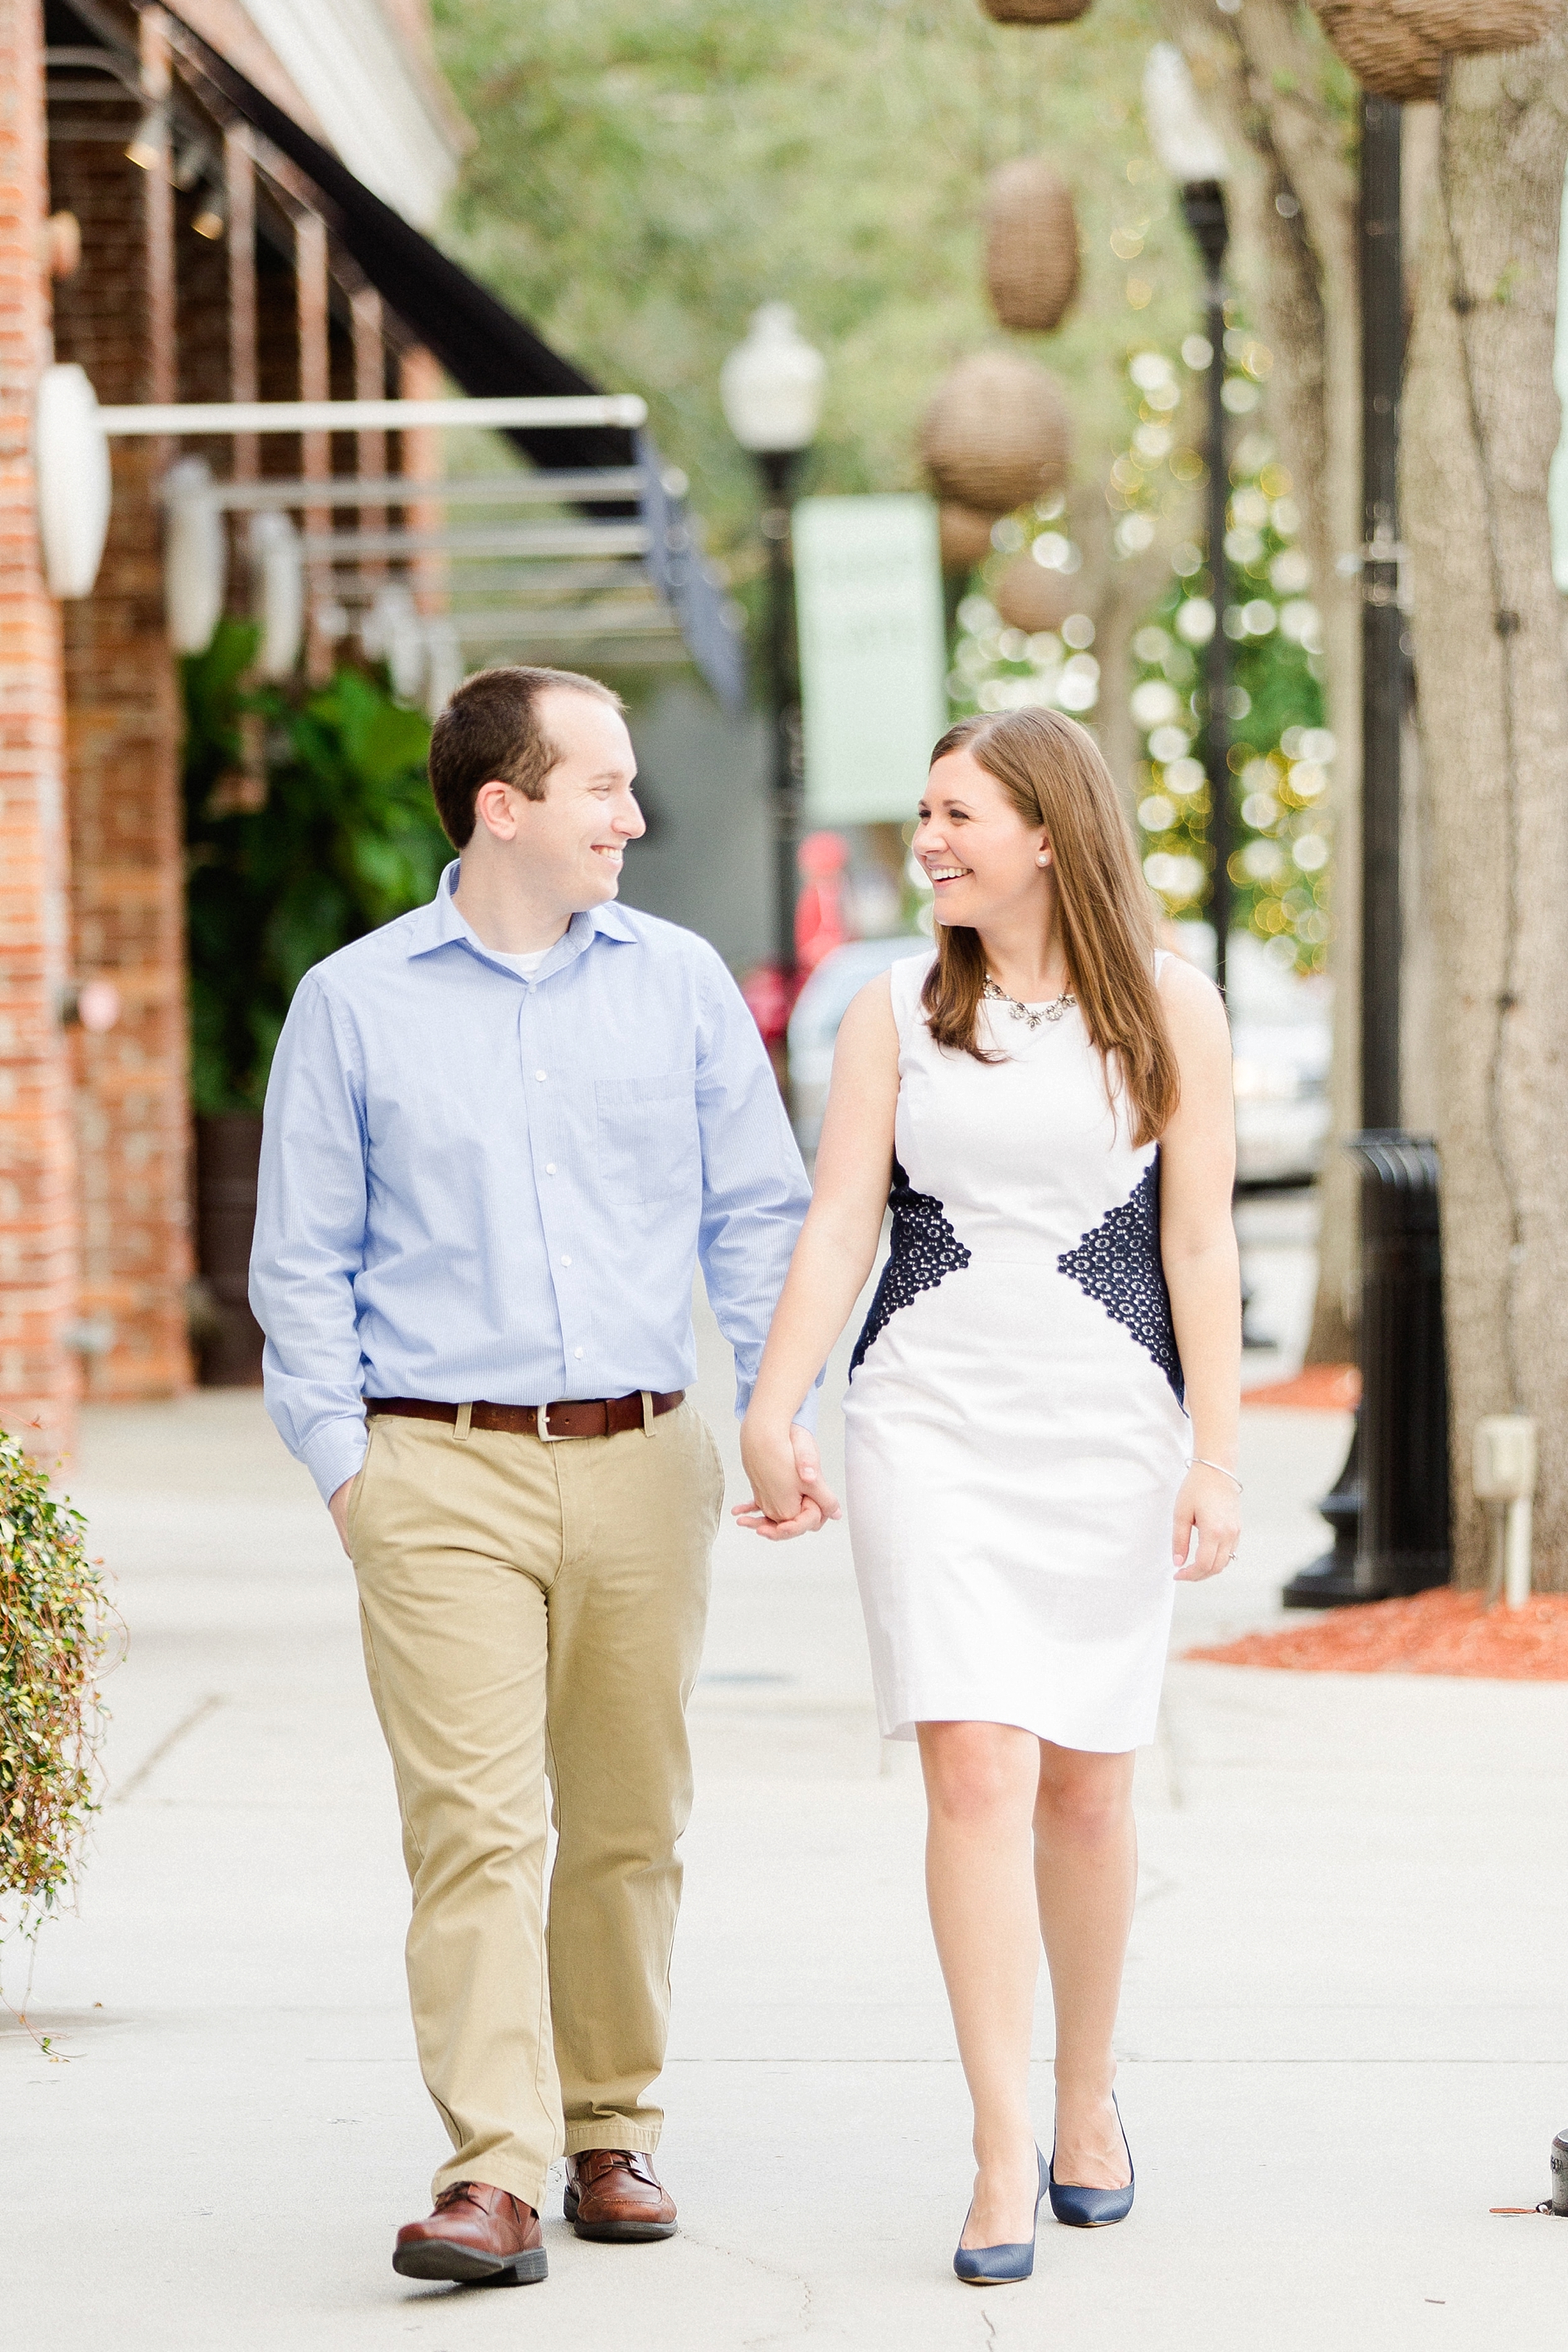 Old Hyde Park Engagement | © Ailyn La Torre Photography 2015